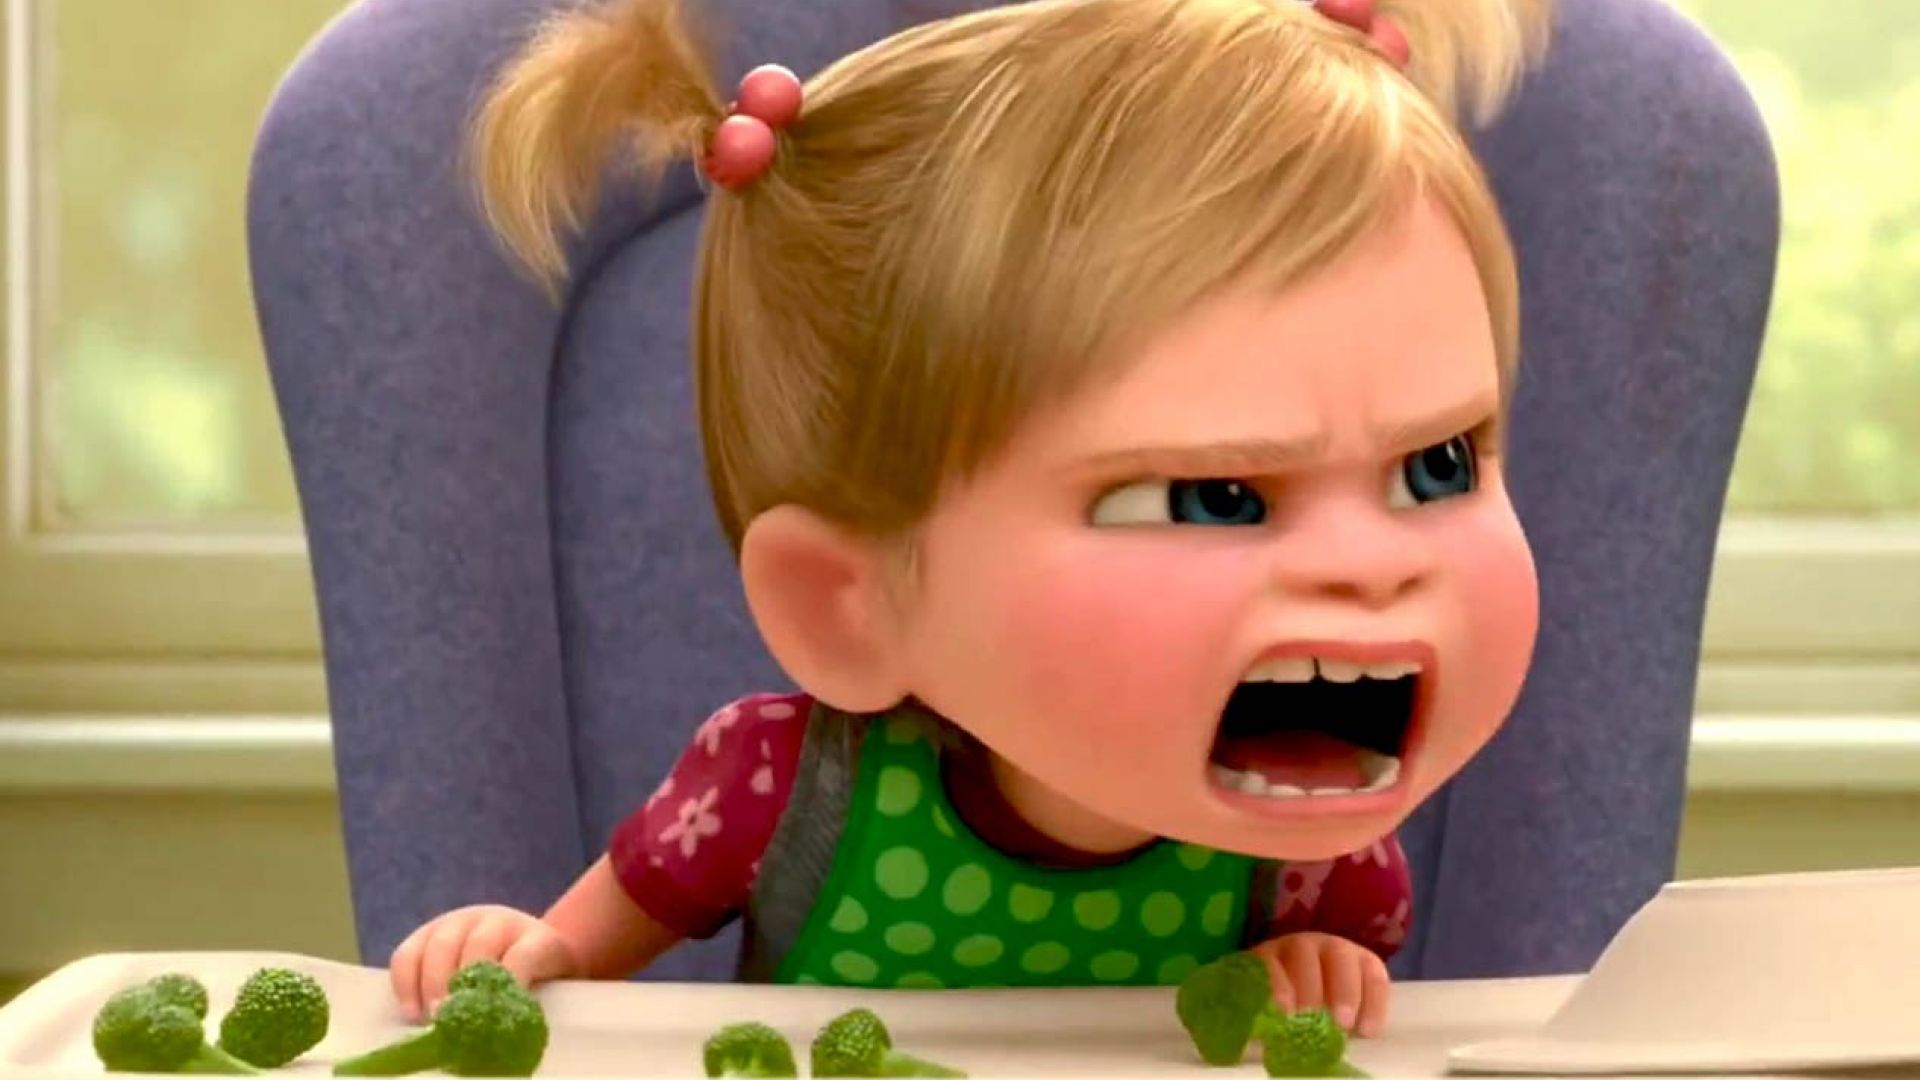 Broccoli causes Disgust and Anger in Inside Out